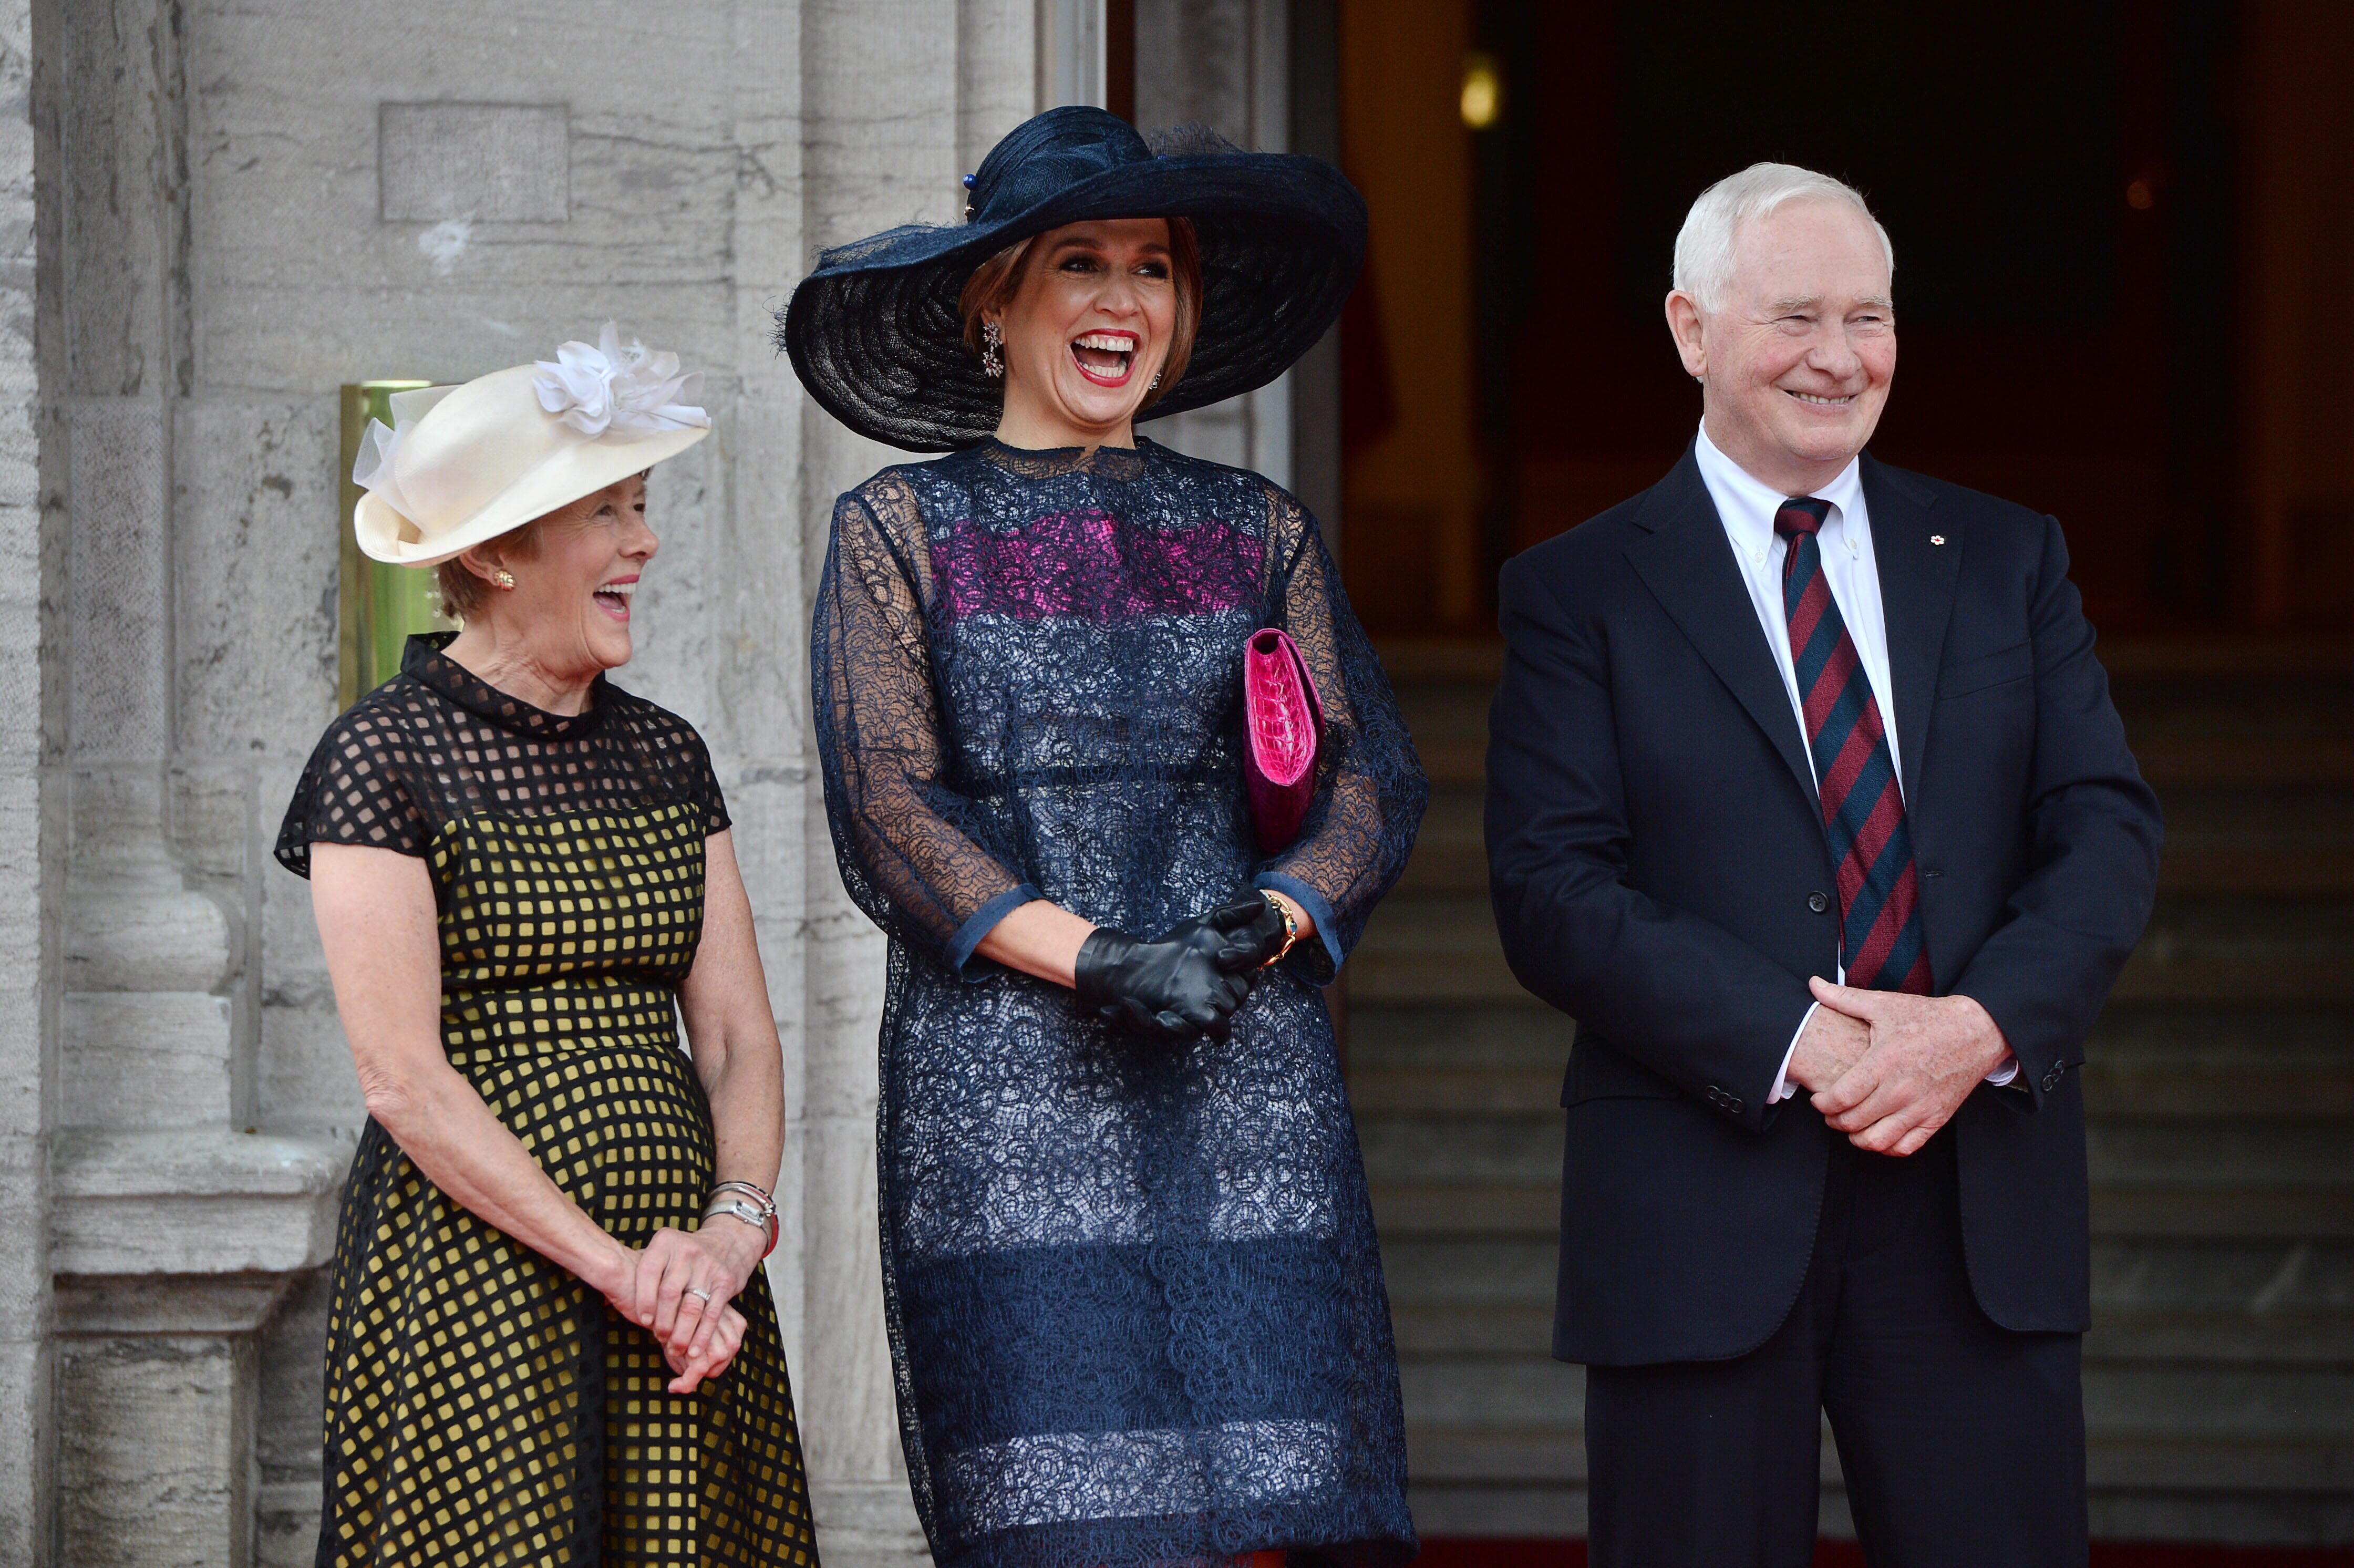 Queen Maxima of the Netherlands, second from left, shares a laugh with Gov.-Gen. David Johnston and his wife Sharon at Rideau Hall in Ottawa on Wednesday, May 27, 2015.  (Sean Kilpatrick/The Canadian Press via AP) MANDATORY CREDIT